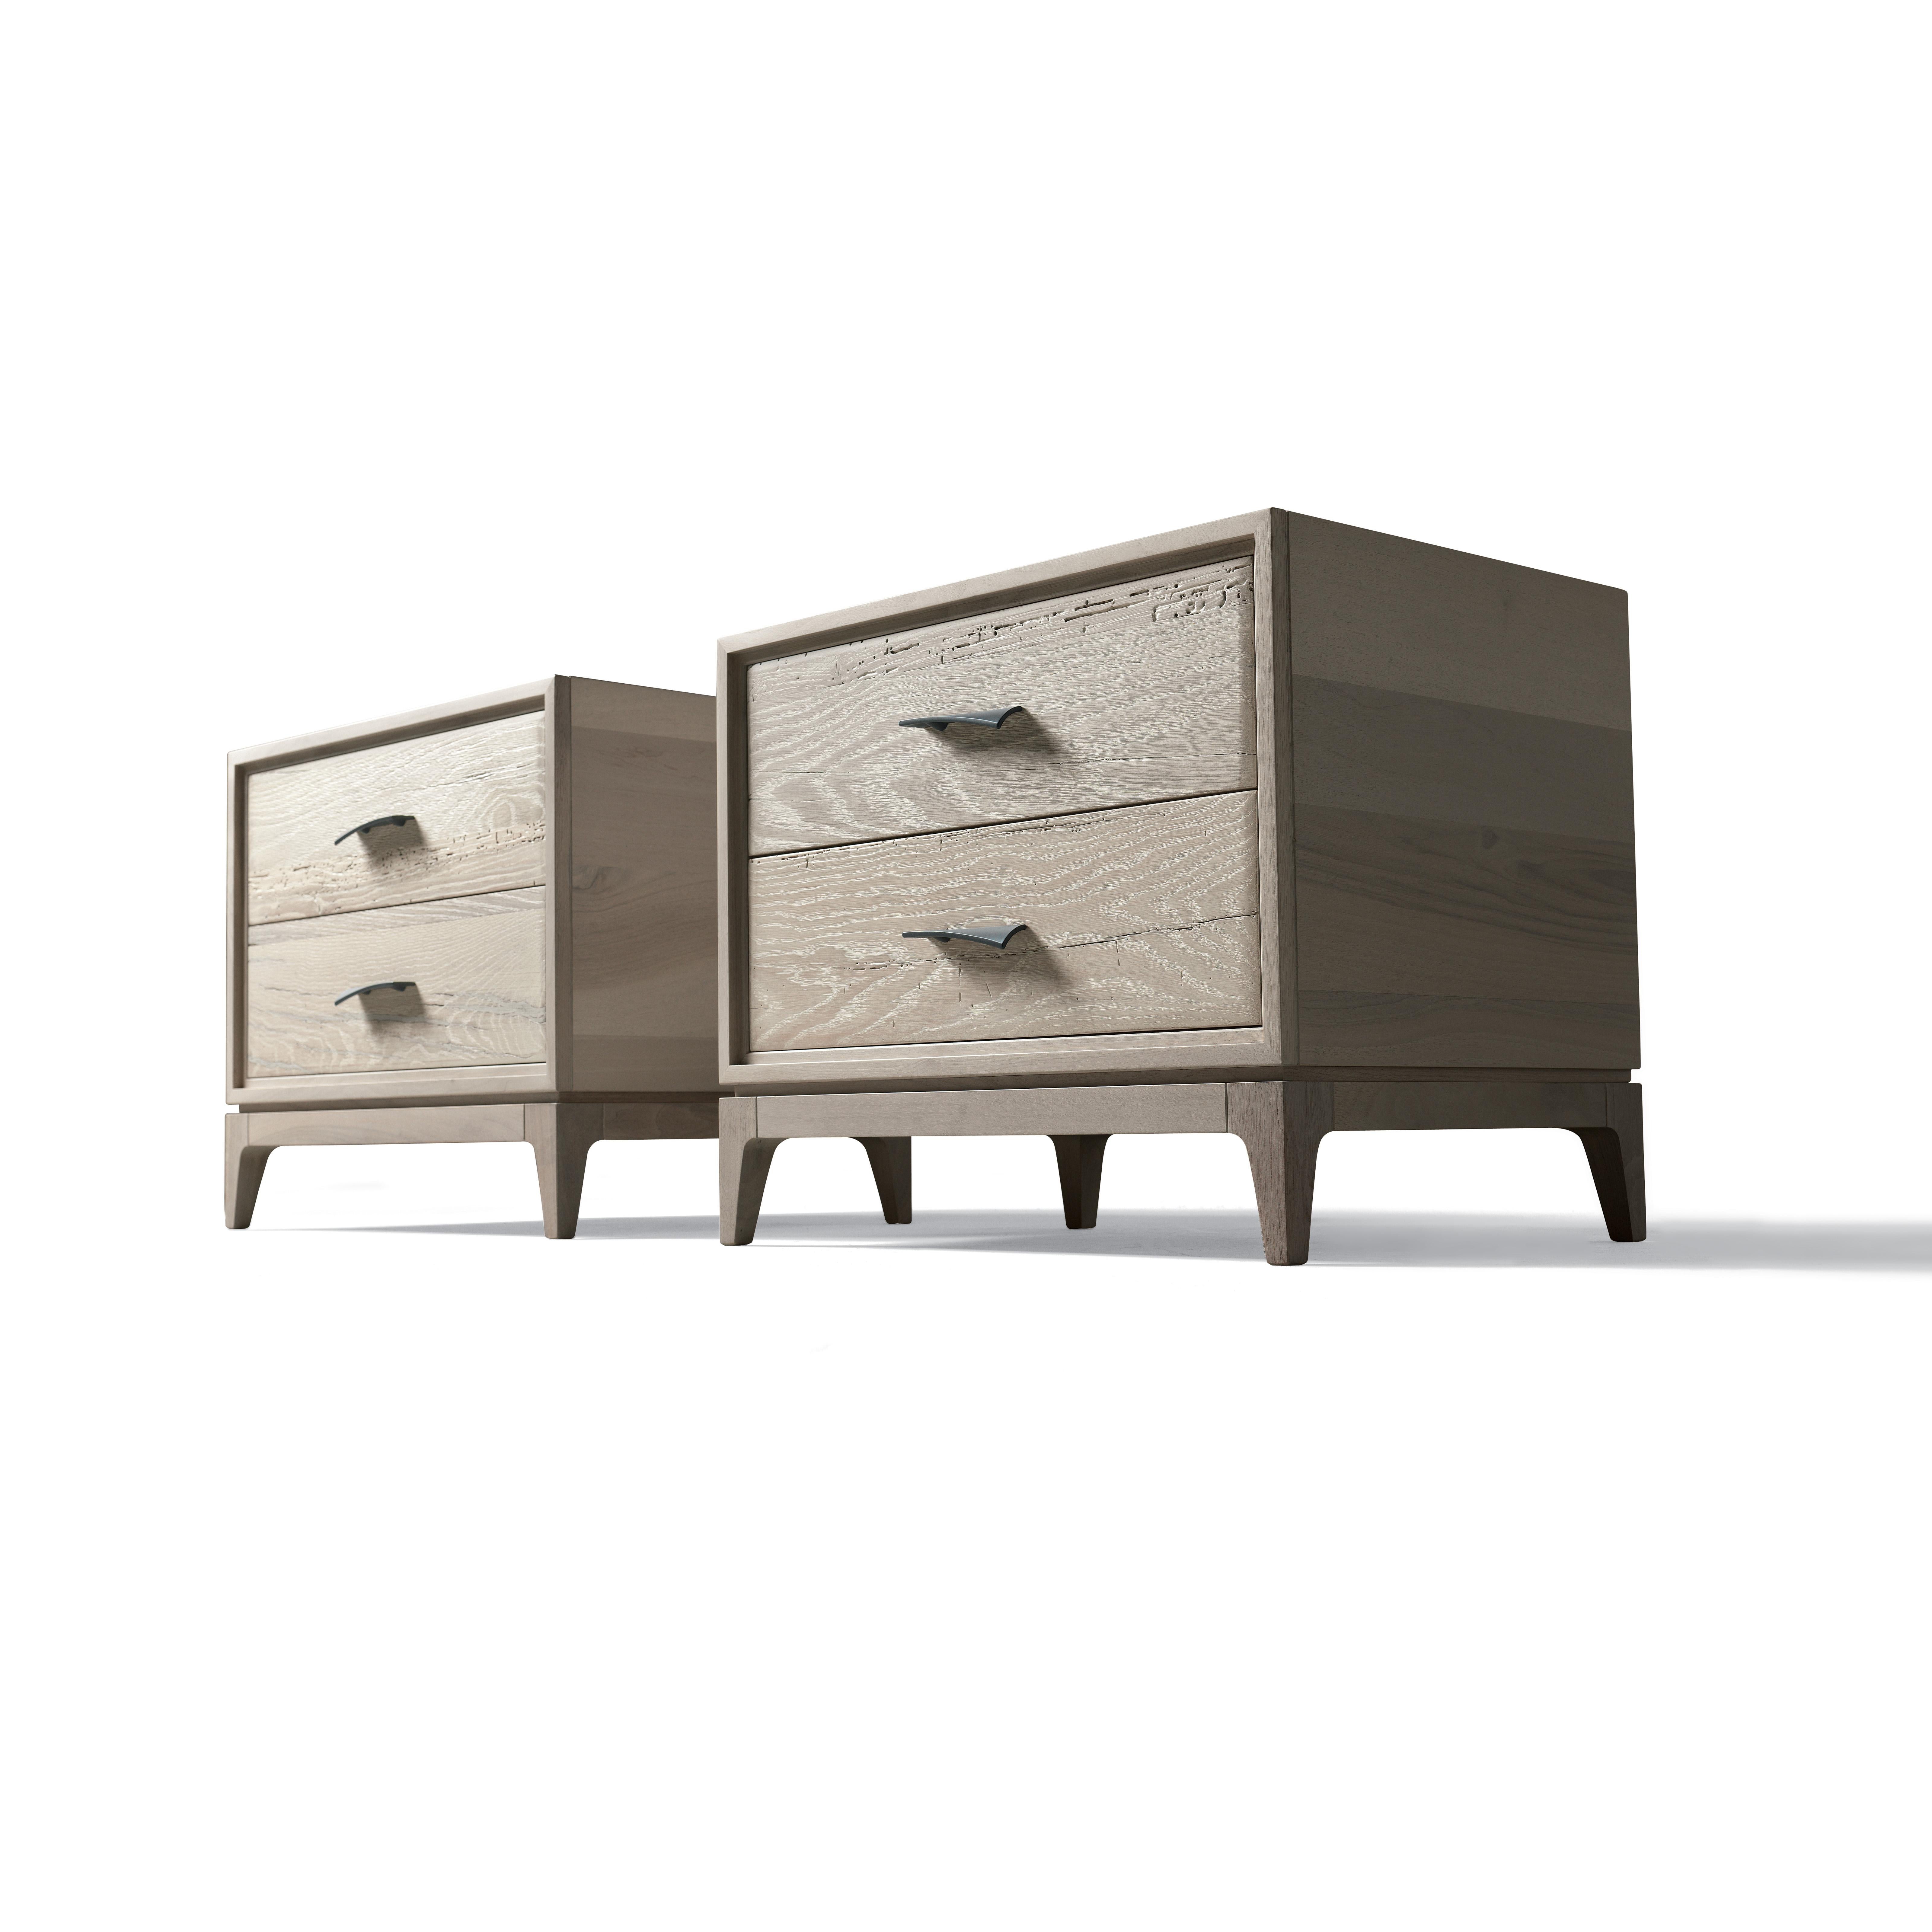 Velo solid wood bedside tables are the result of passion, skills, and refined craftsmanship. They feature structure in solid walnut blockboard and drawers in antique oak with a slightly inclined handle to add personality to the furniture. Thanks to